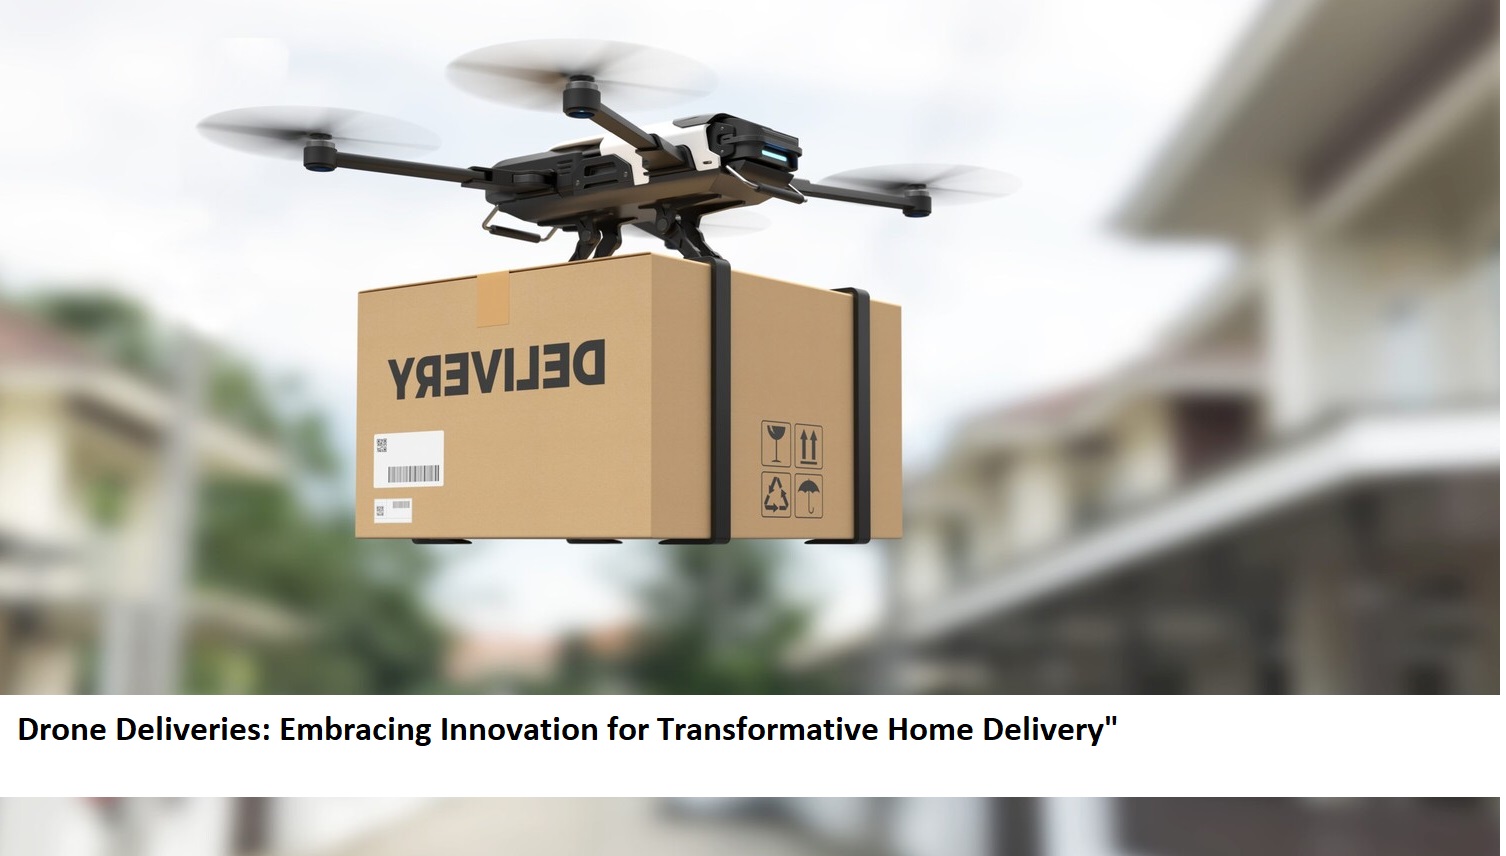 Drone Deliveries Embracing Innovation for Transformative Home Delivery (2)